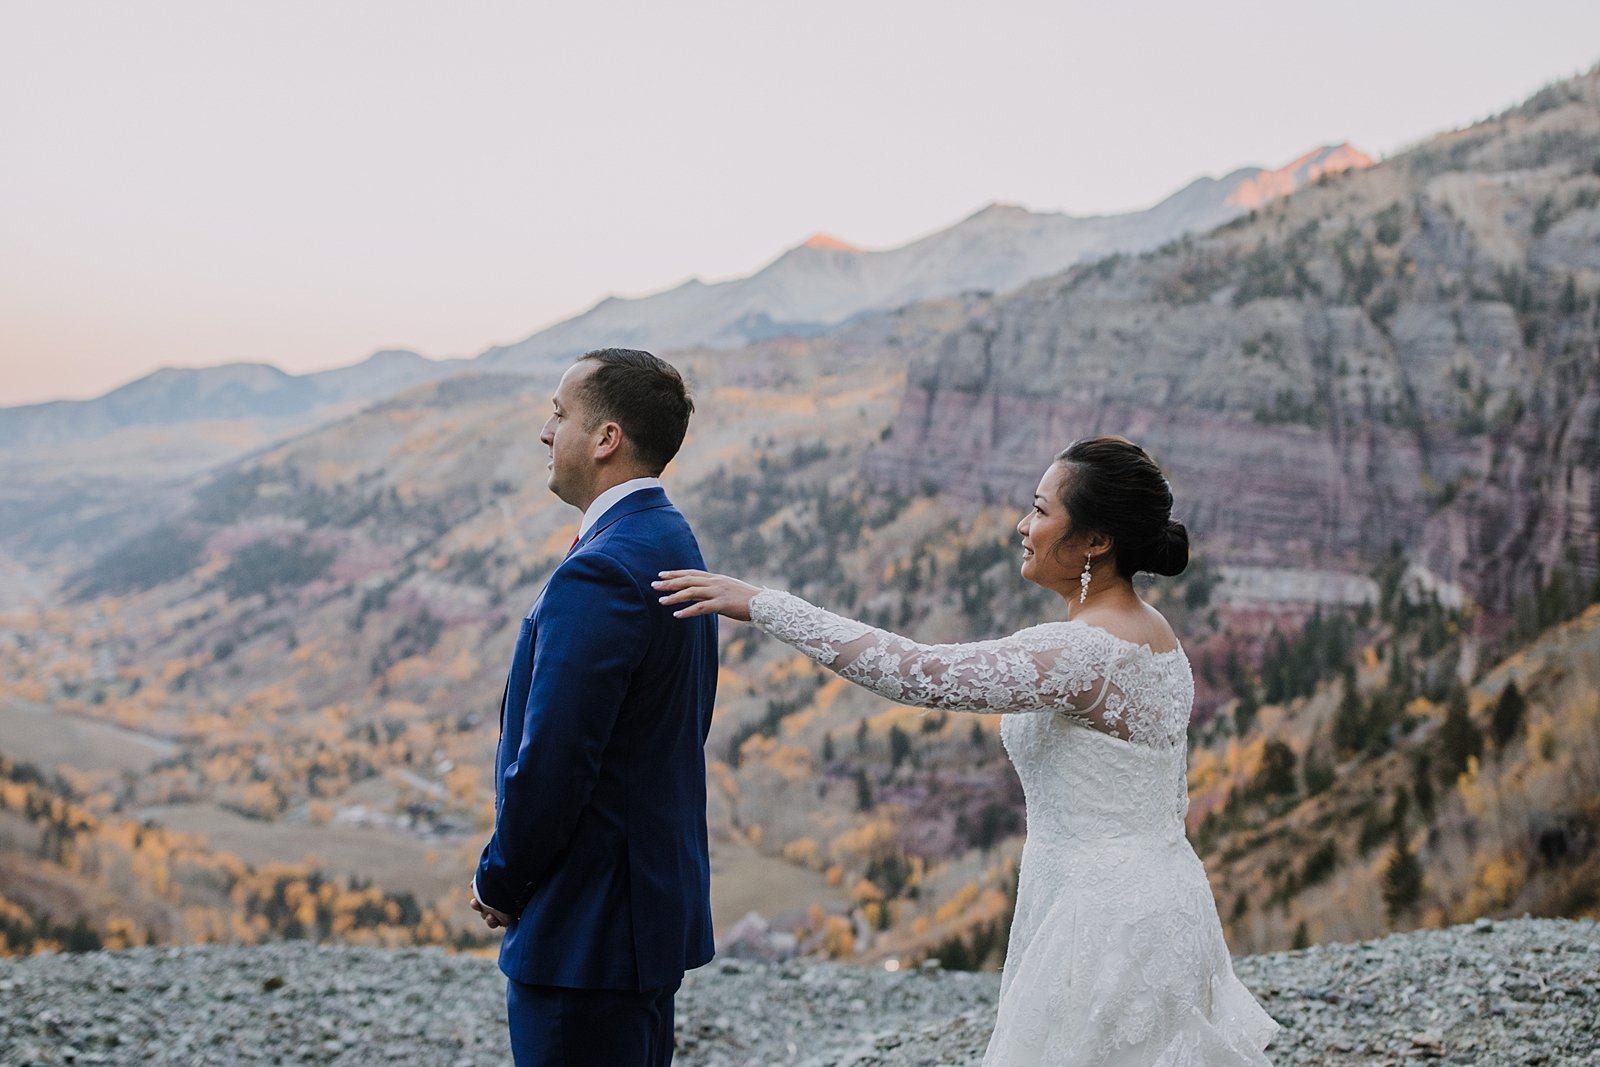 bride and groom first look, bride and groom on a cliff edge, cliffside elopement, mountain climbing elopement, colorado climbing elopement, southern colorado elopement